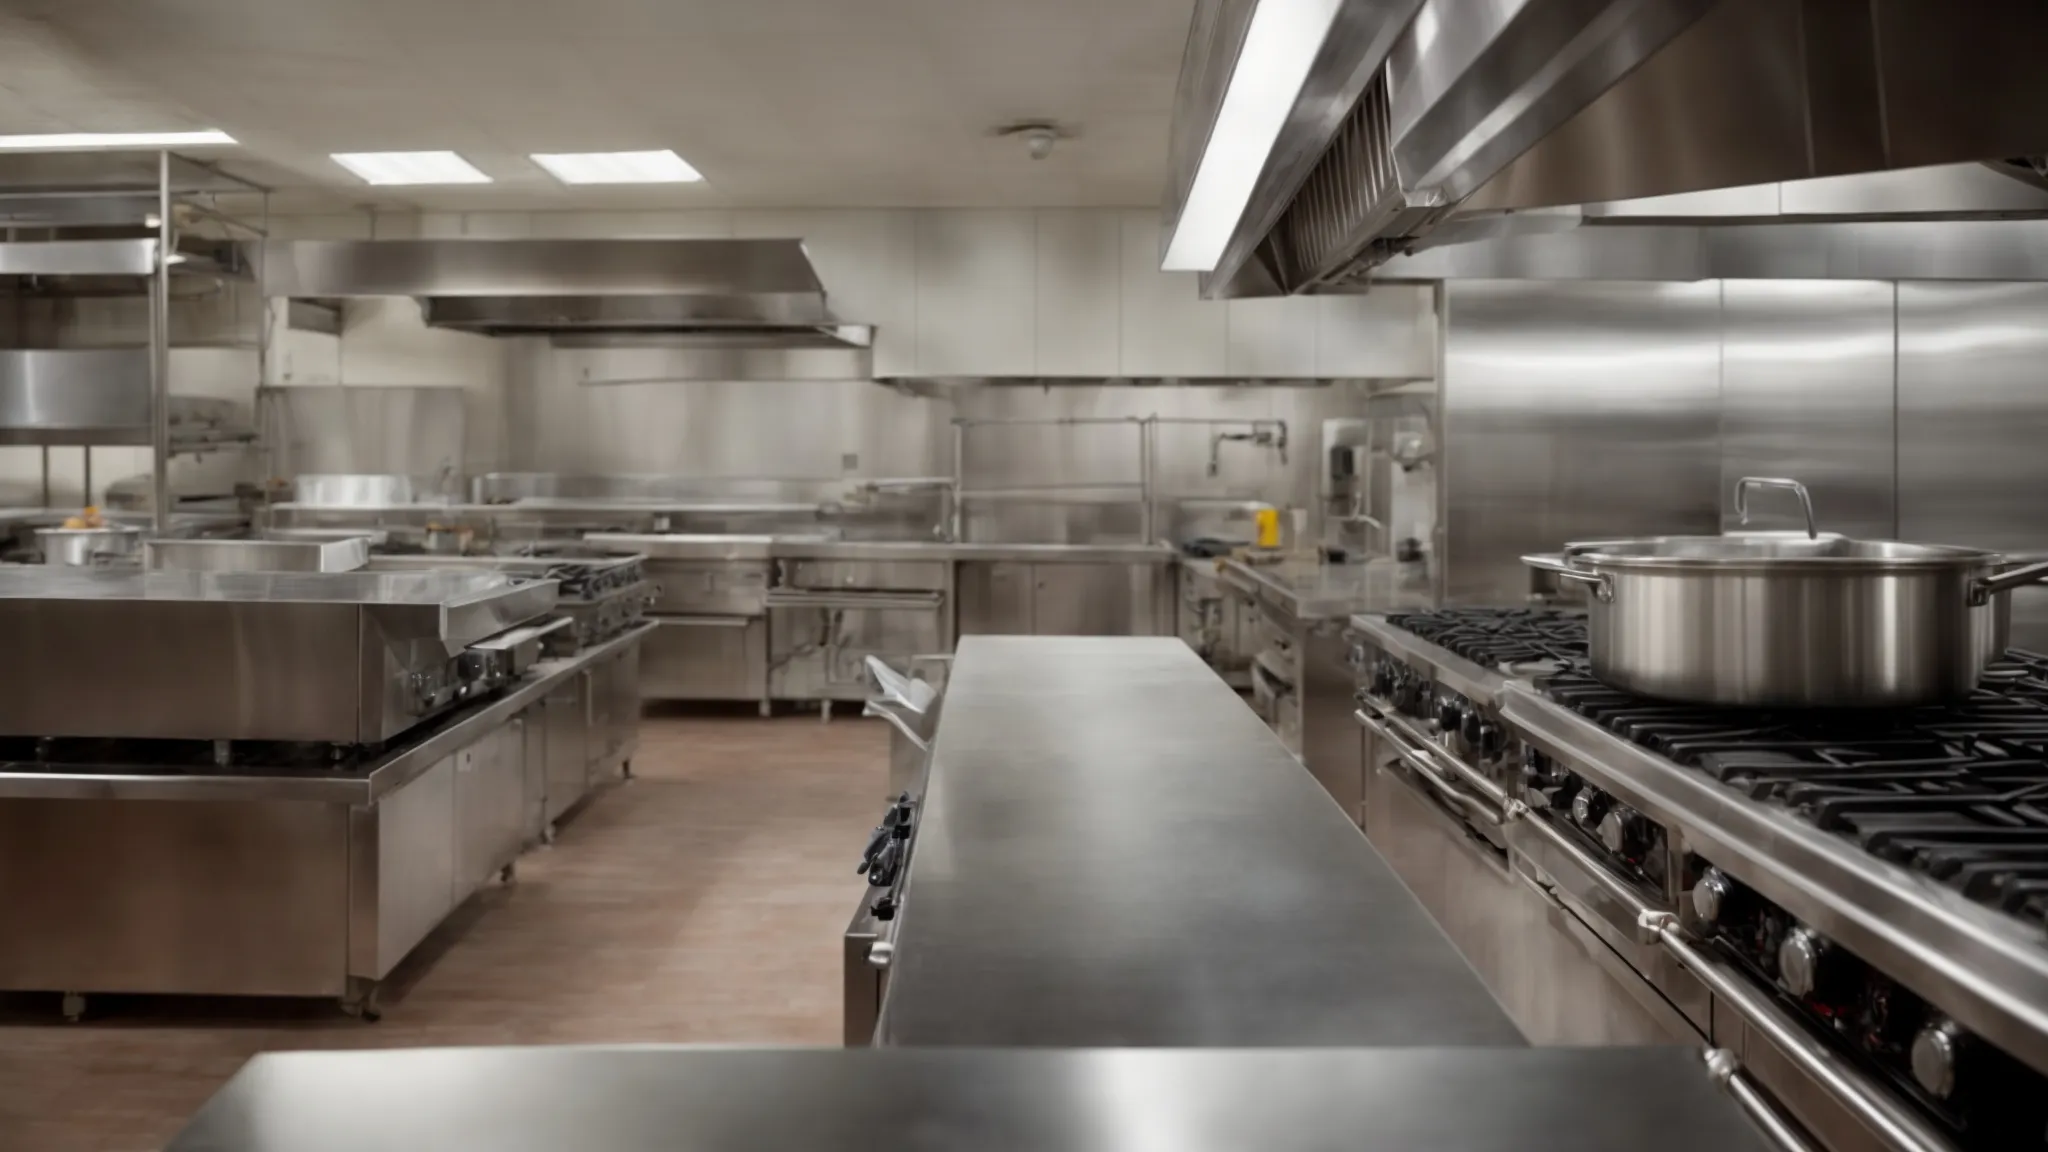 a commercial kitchen gleams with cleanliness around the stove and hoods, indicating a recent thorough cleaning.